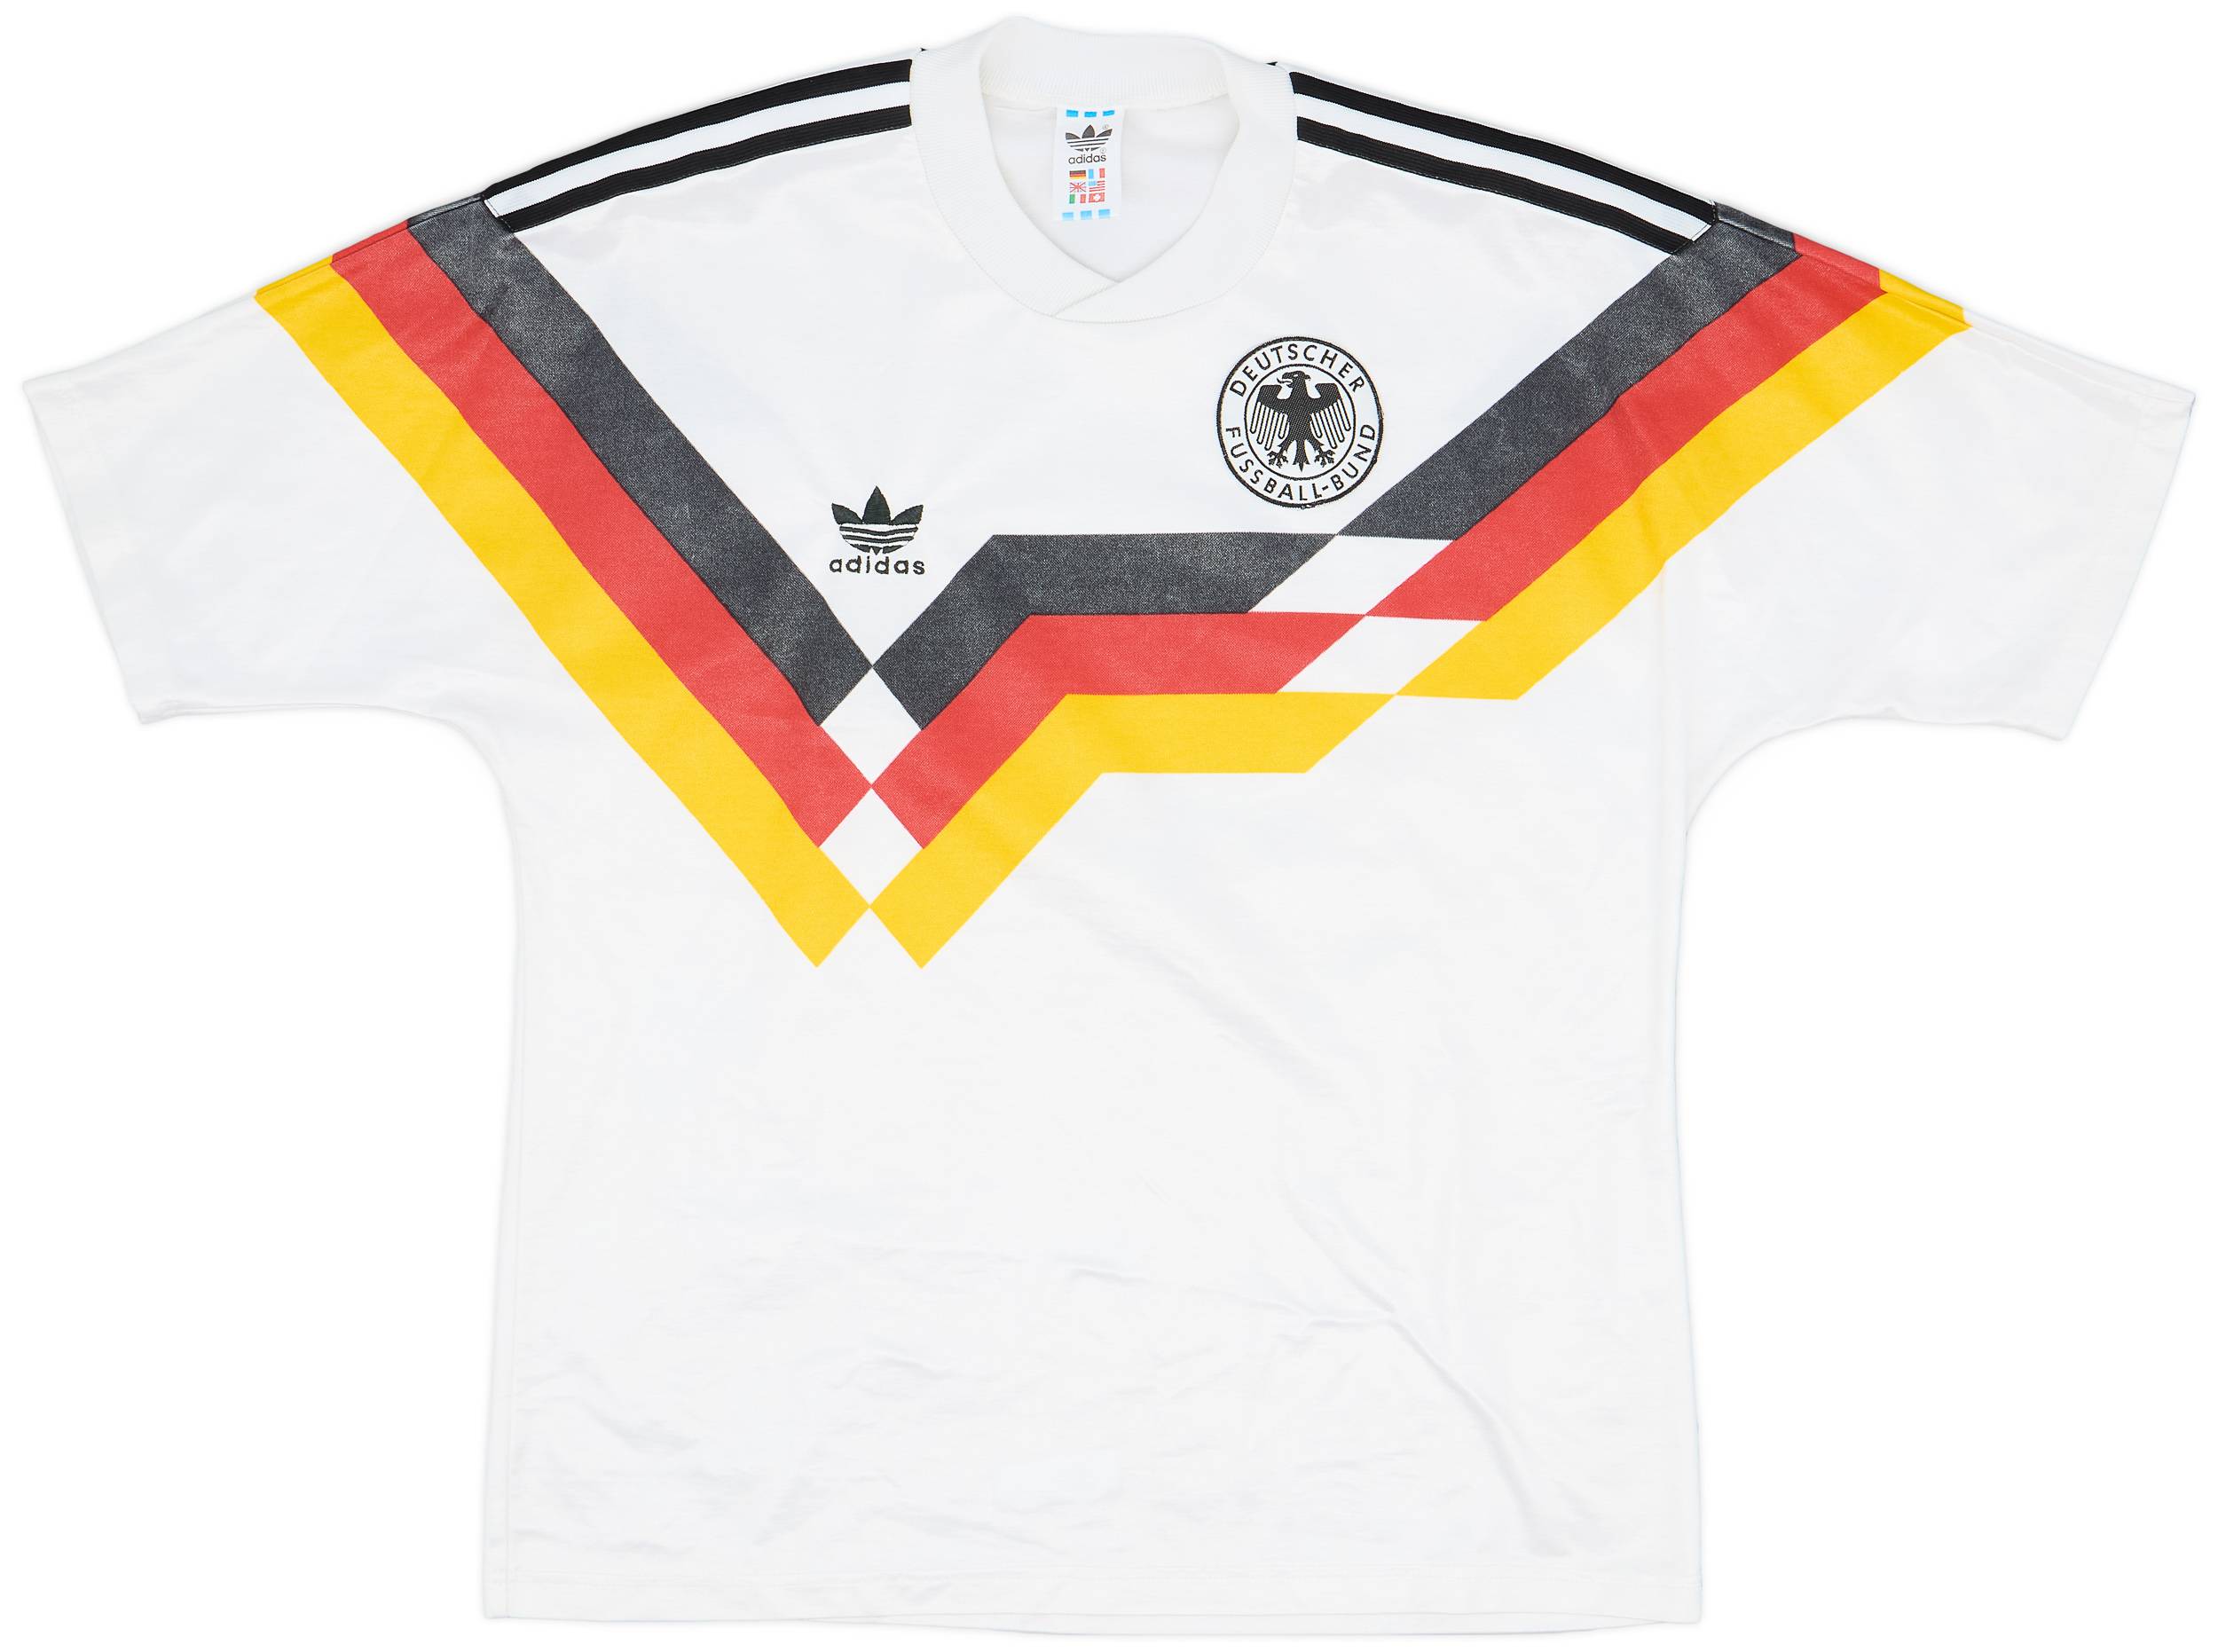 1988-90 West Germany Home Shirt - 10/10 - (L/XL)